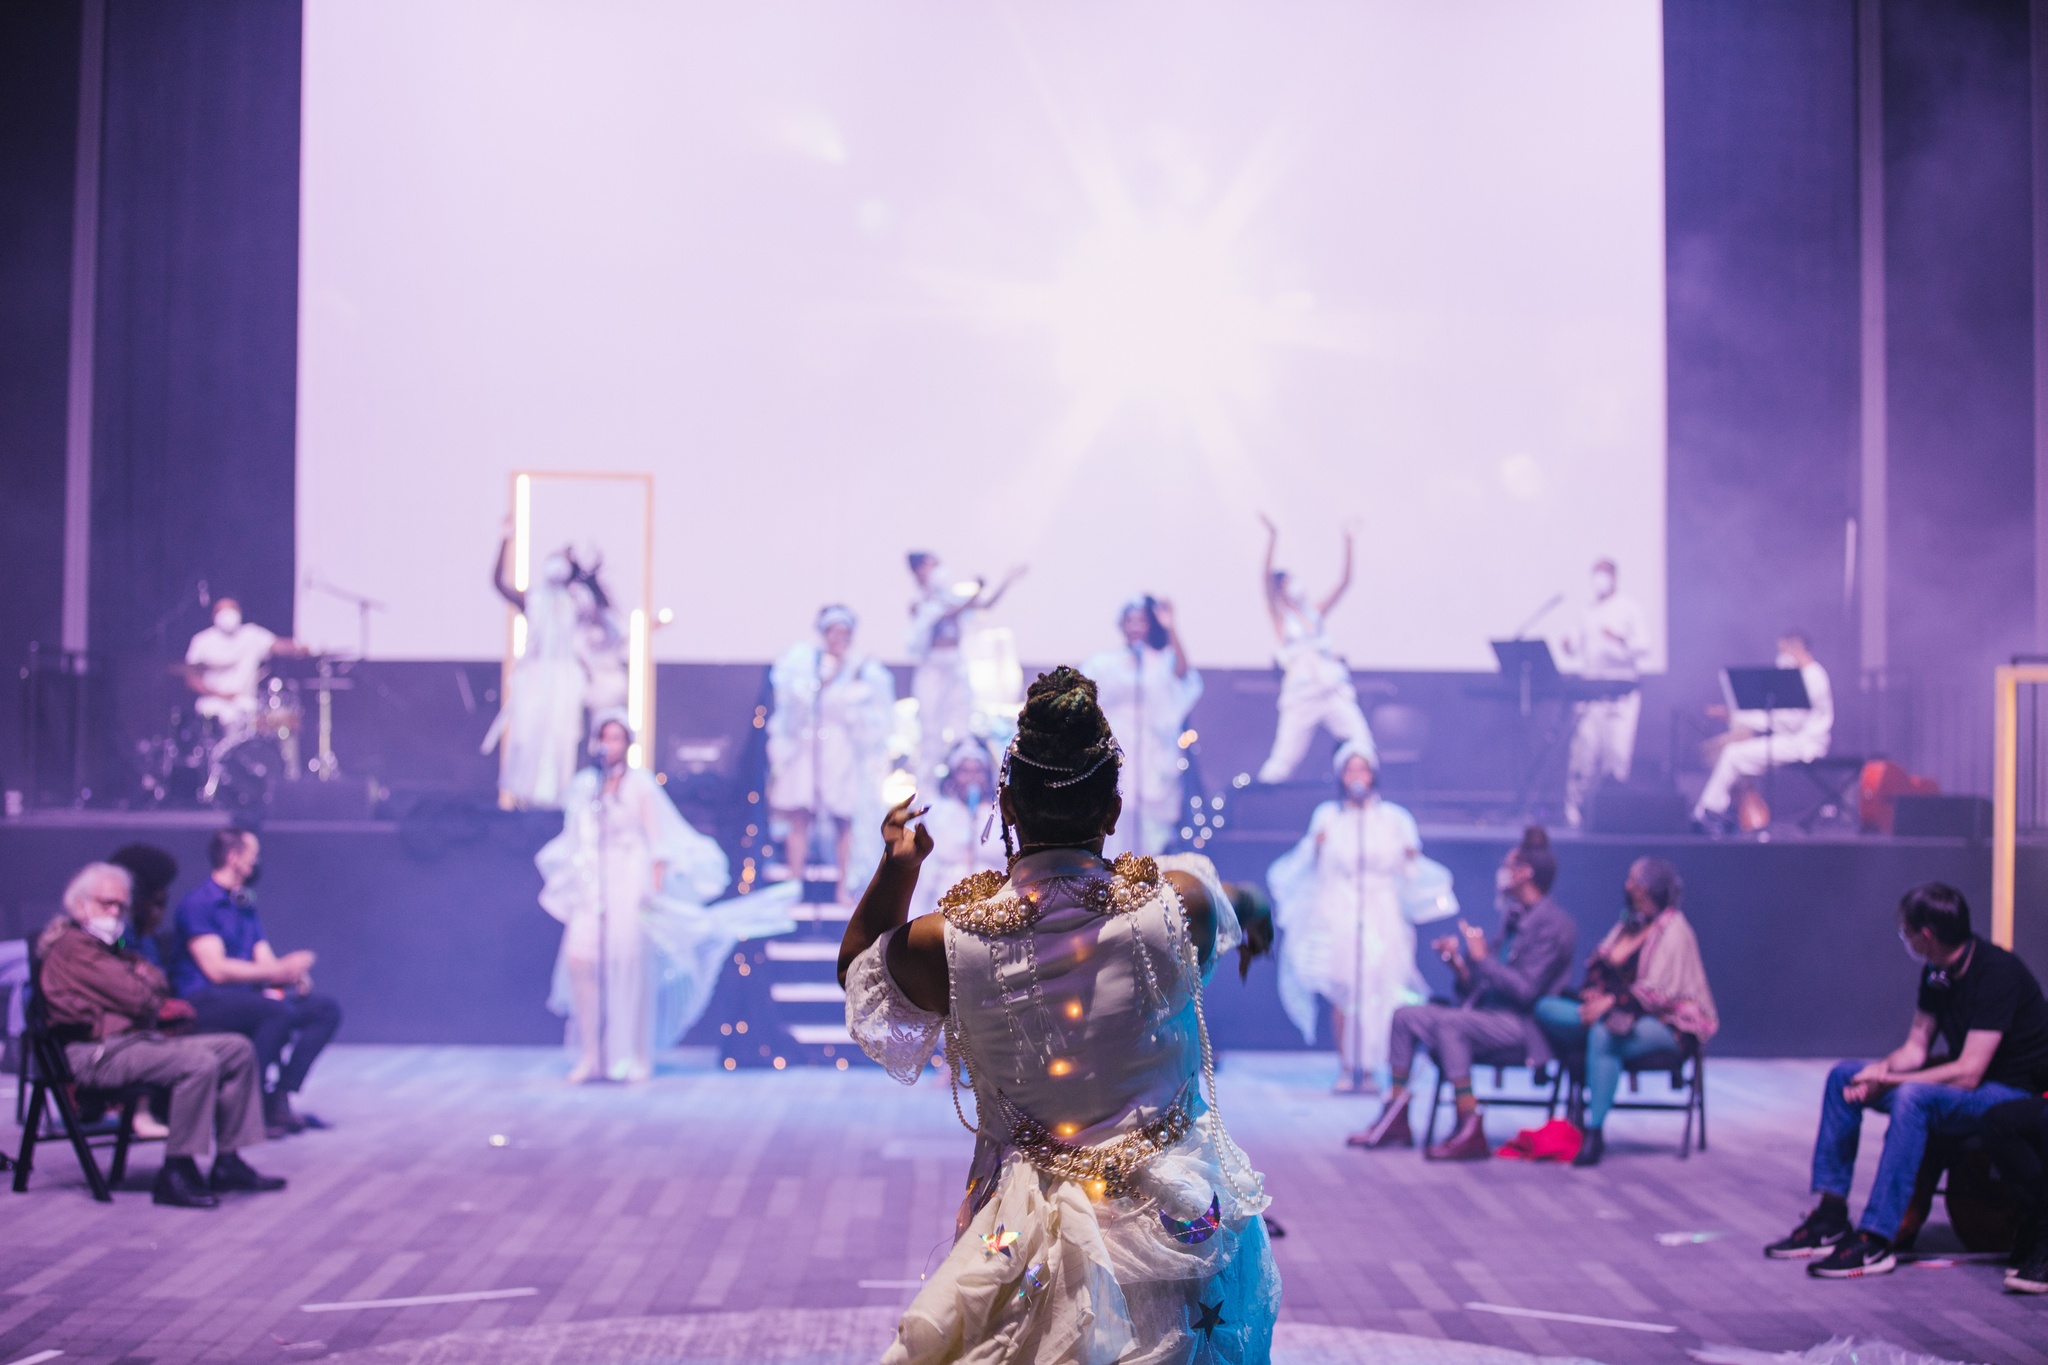 A performer dressed in white with her back to the camera faces a line of performers on a stage in the background. The performance space is lit with a bright pale purple light.